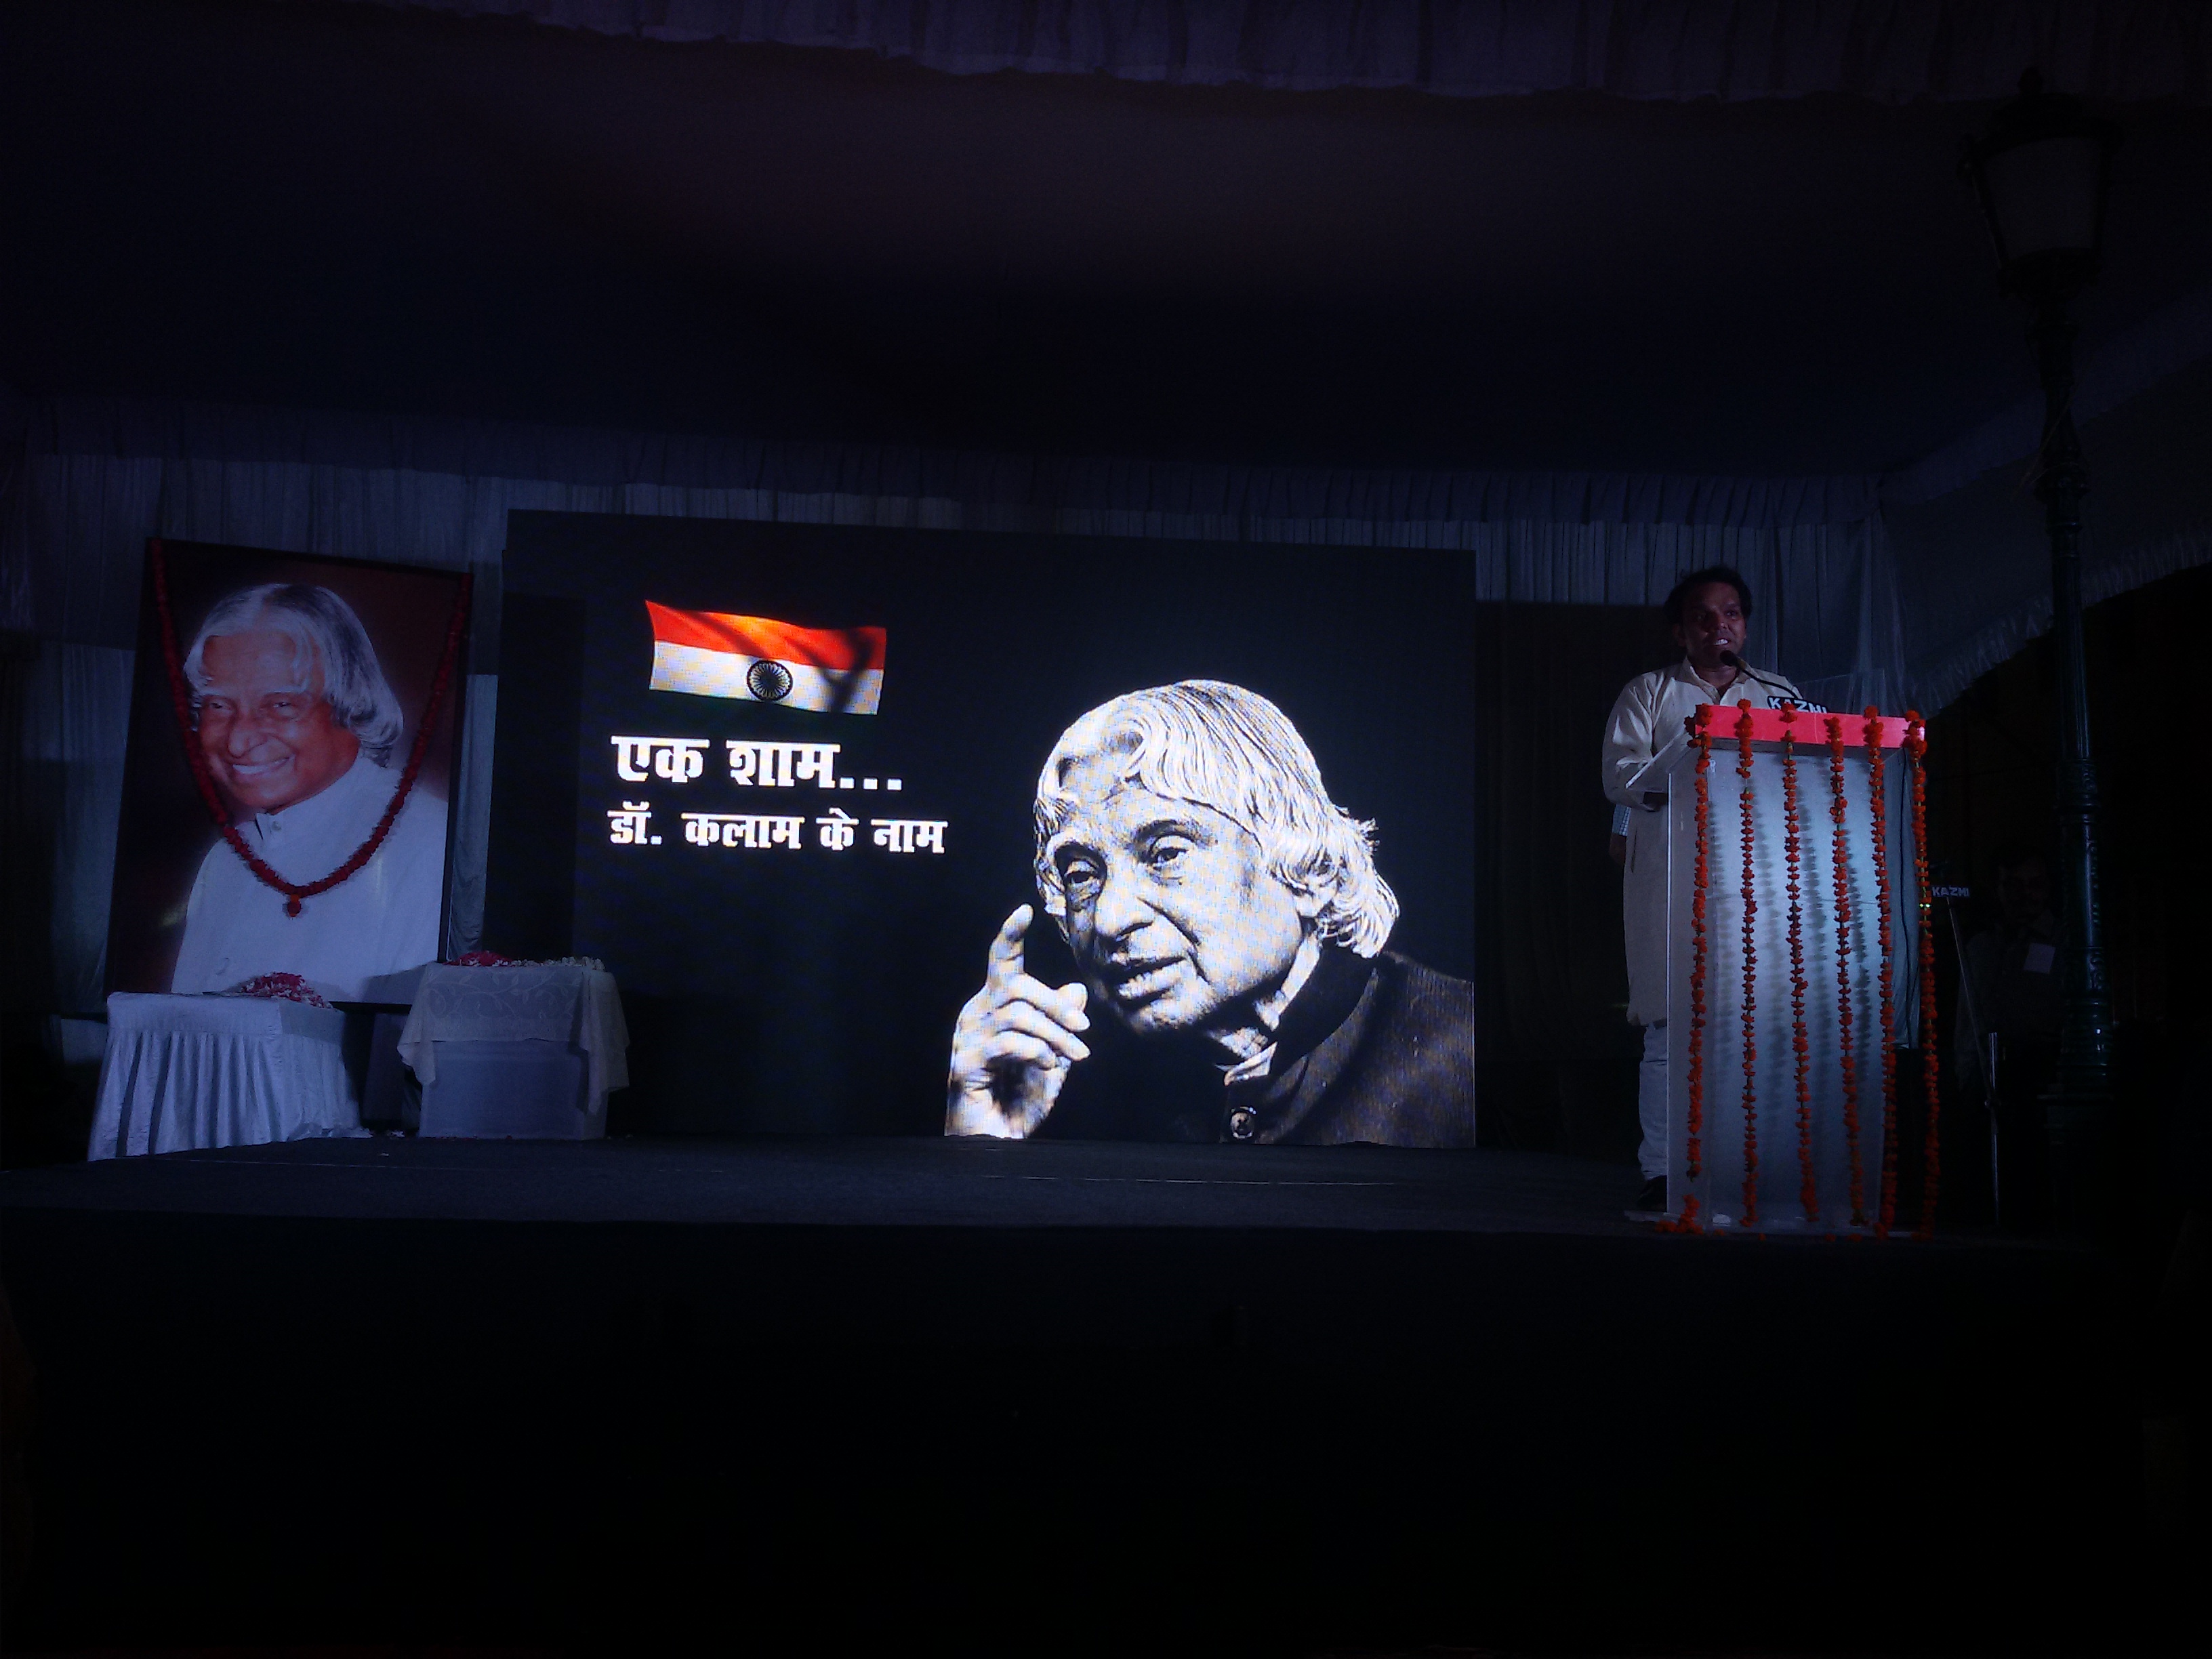 A TRIBUTE TO DR. KALAM